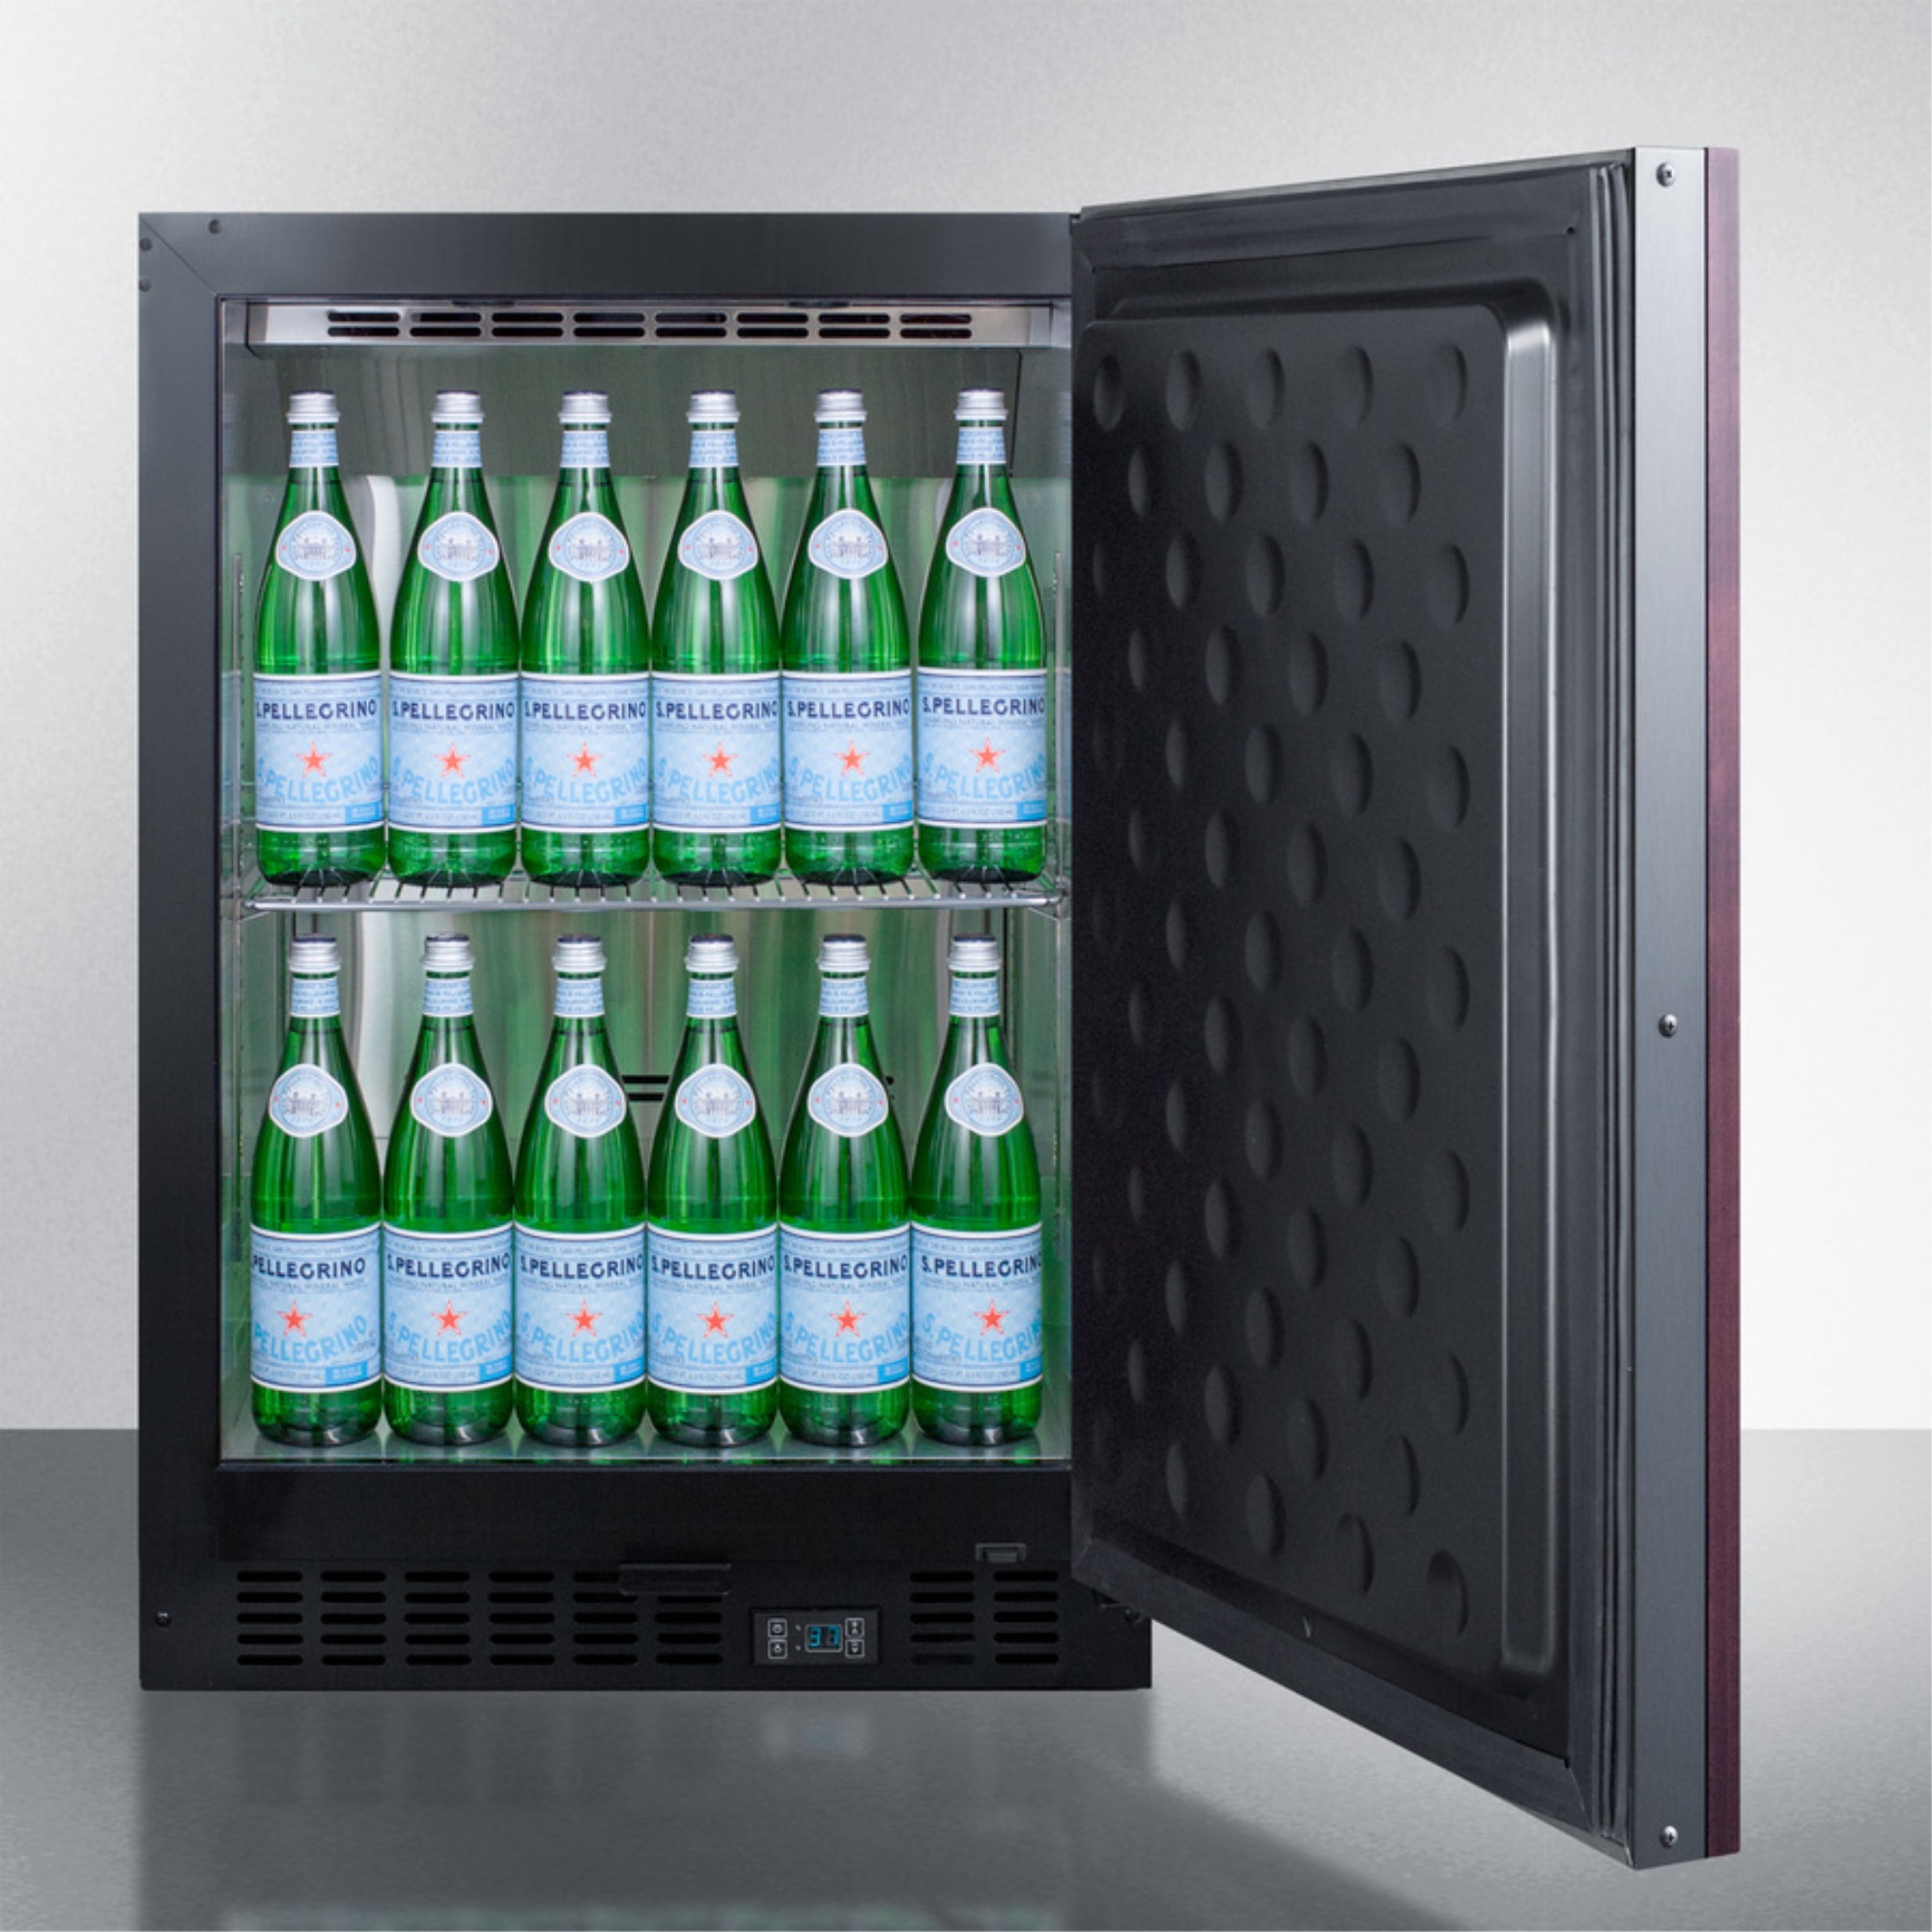 Summit Commercial Built-in undercounter commercial refrigerator with solid panel-ready door and SS interior